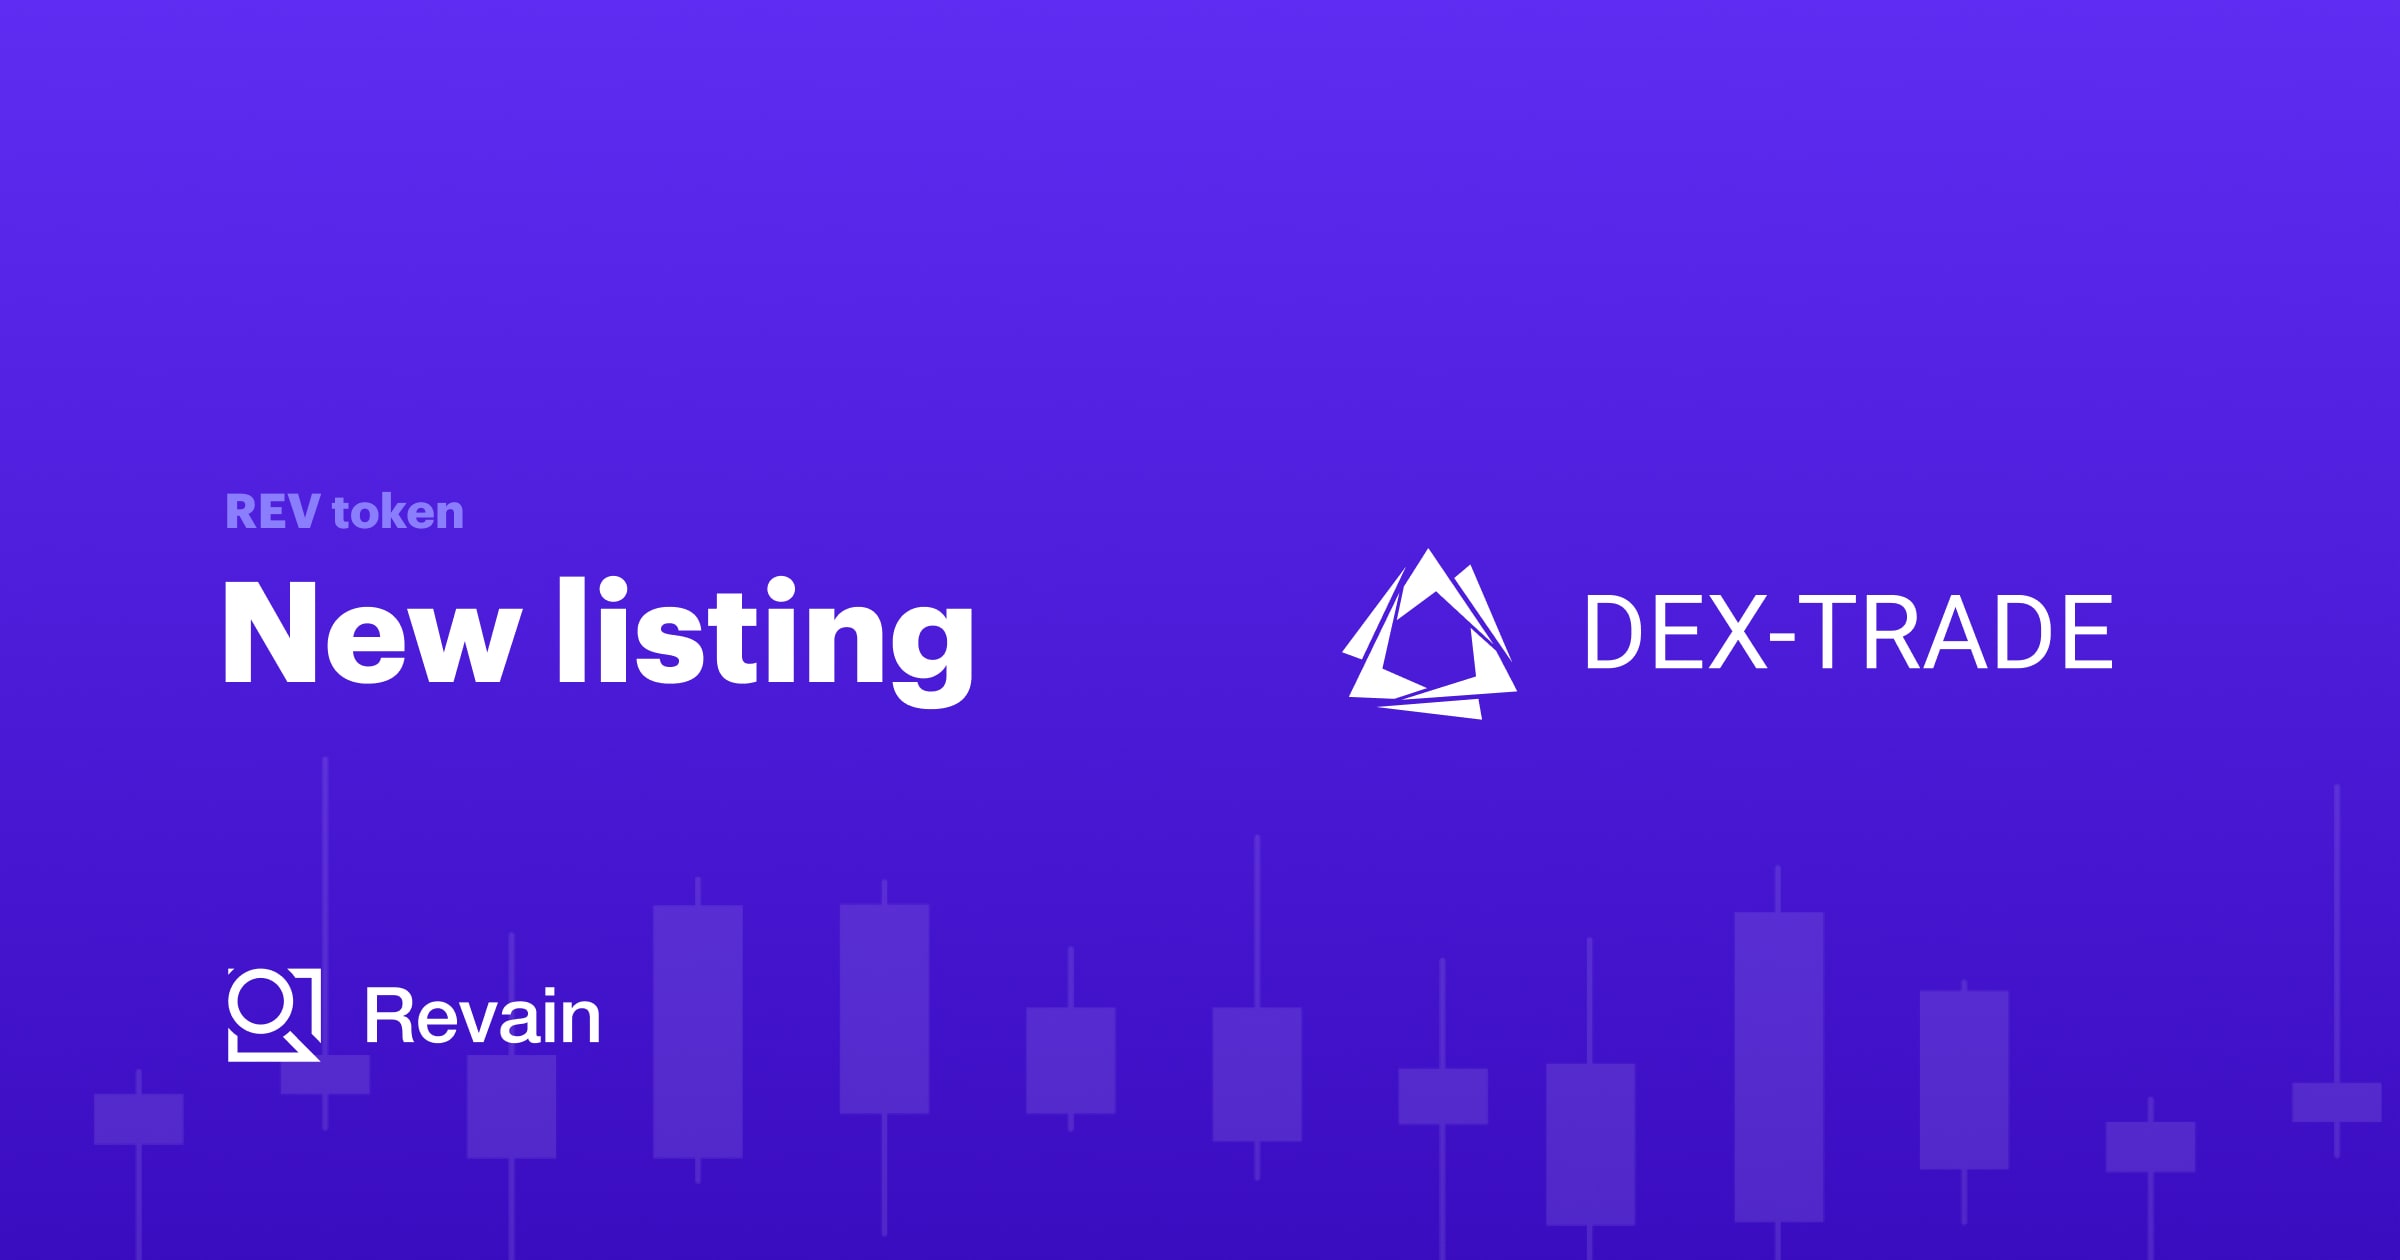 Article Revain is listed on the Dex-Trade